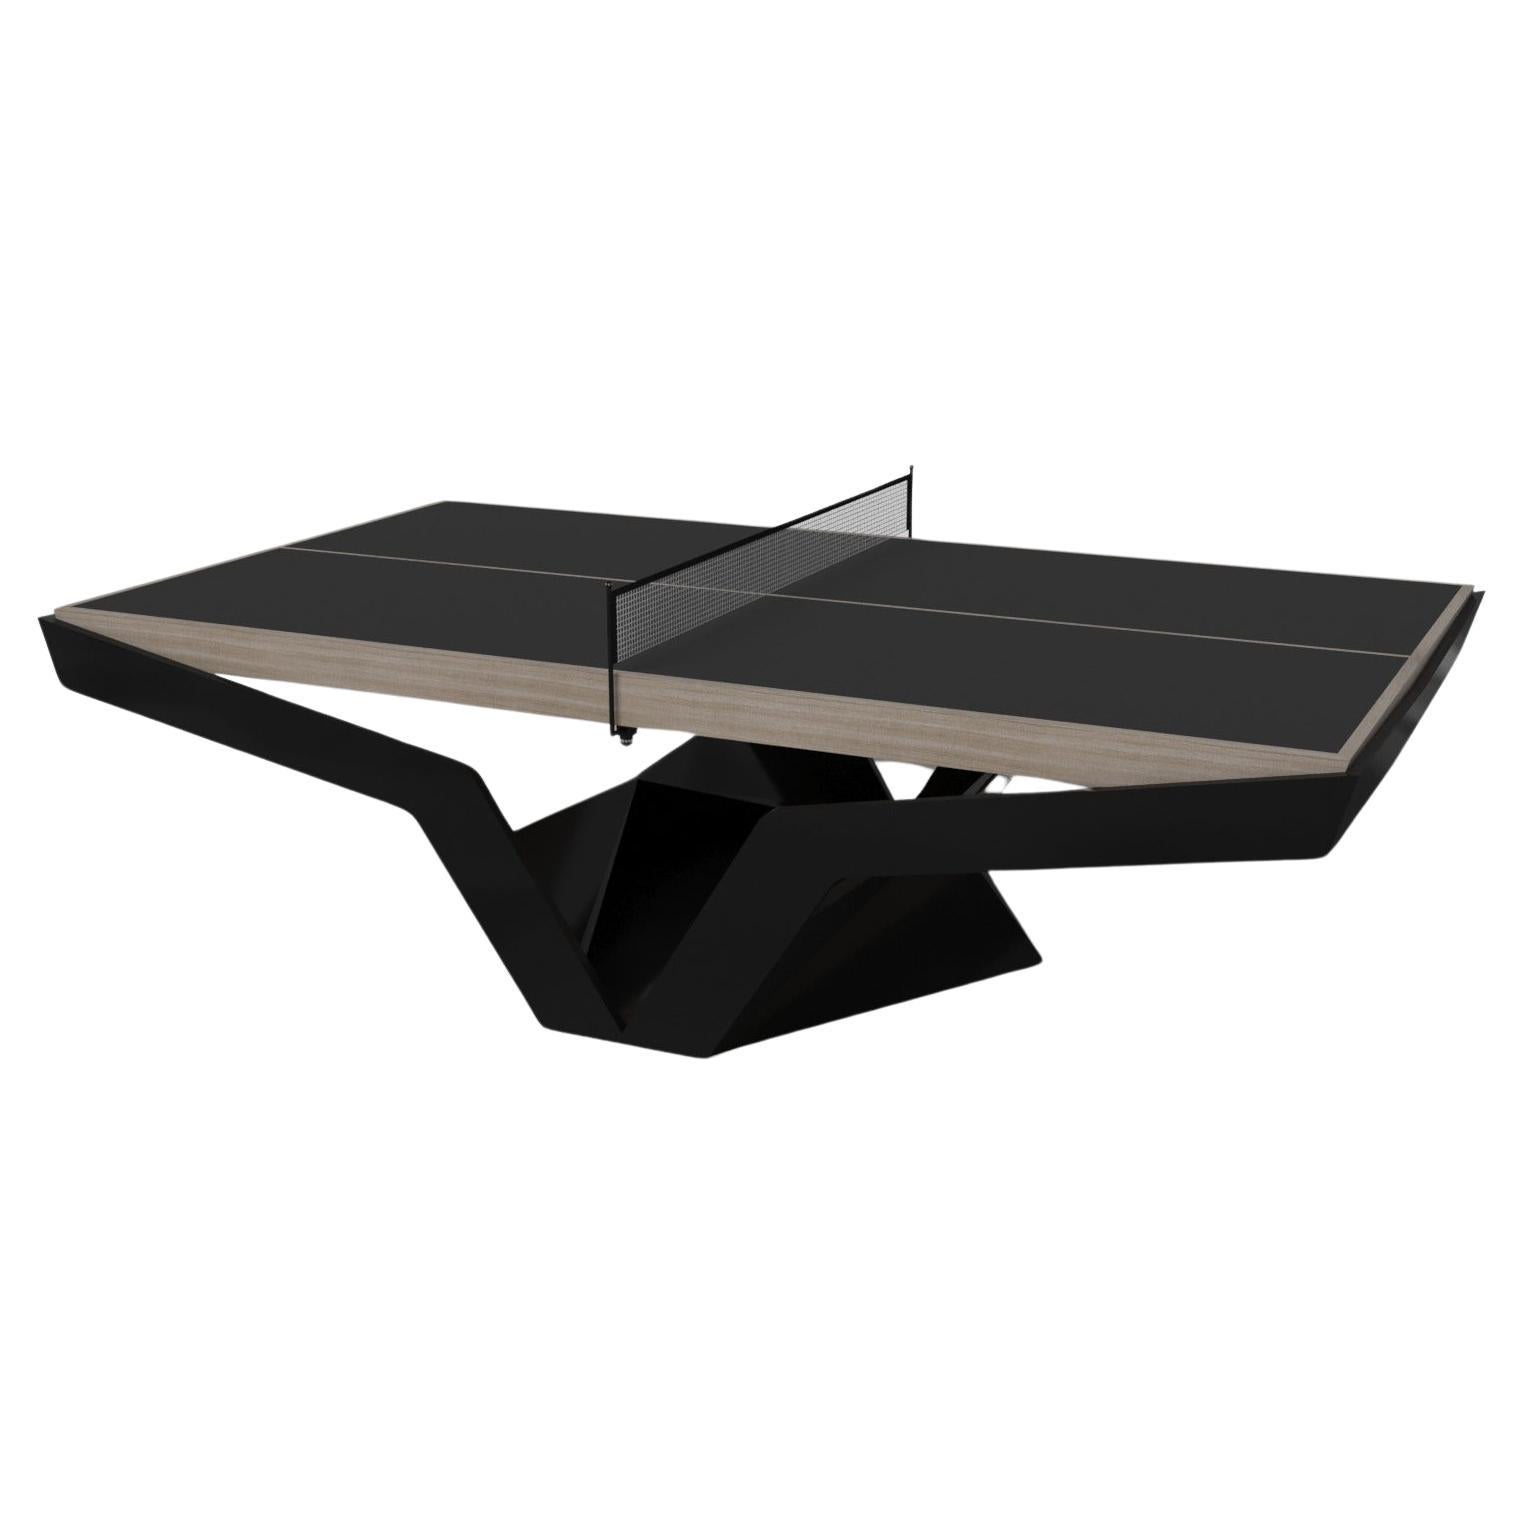 Elevate Customs Enzo Tennis Tables / Solid White Oak Wood in 9' - Made in USA